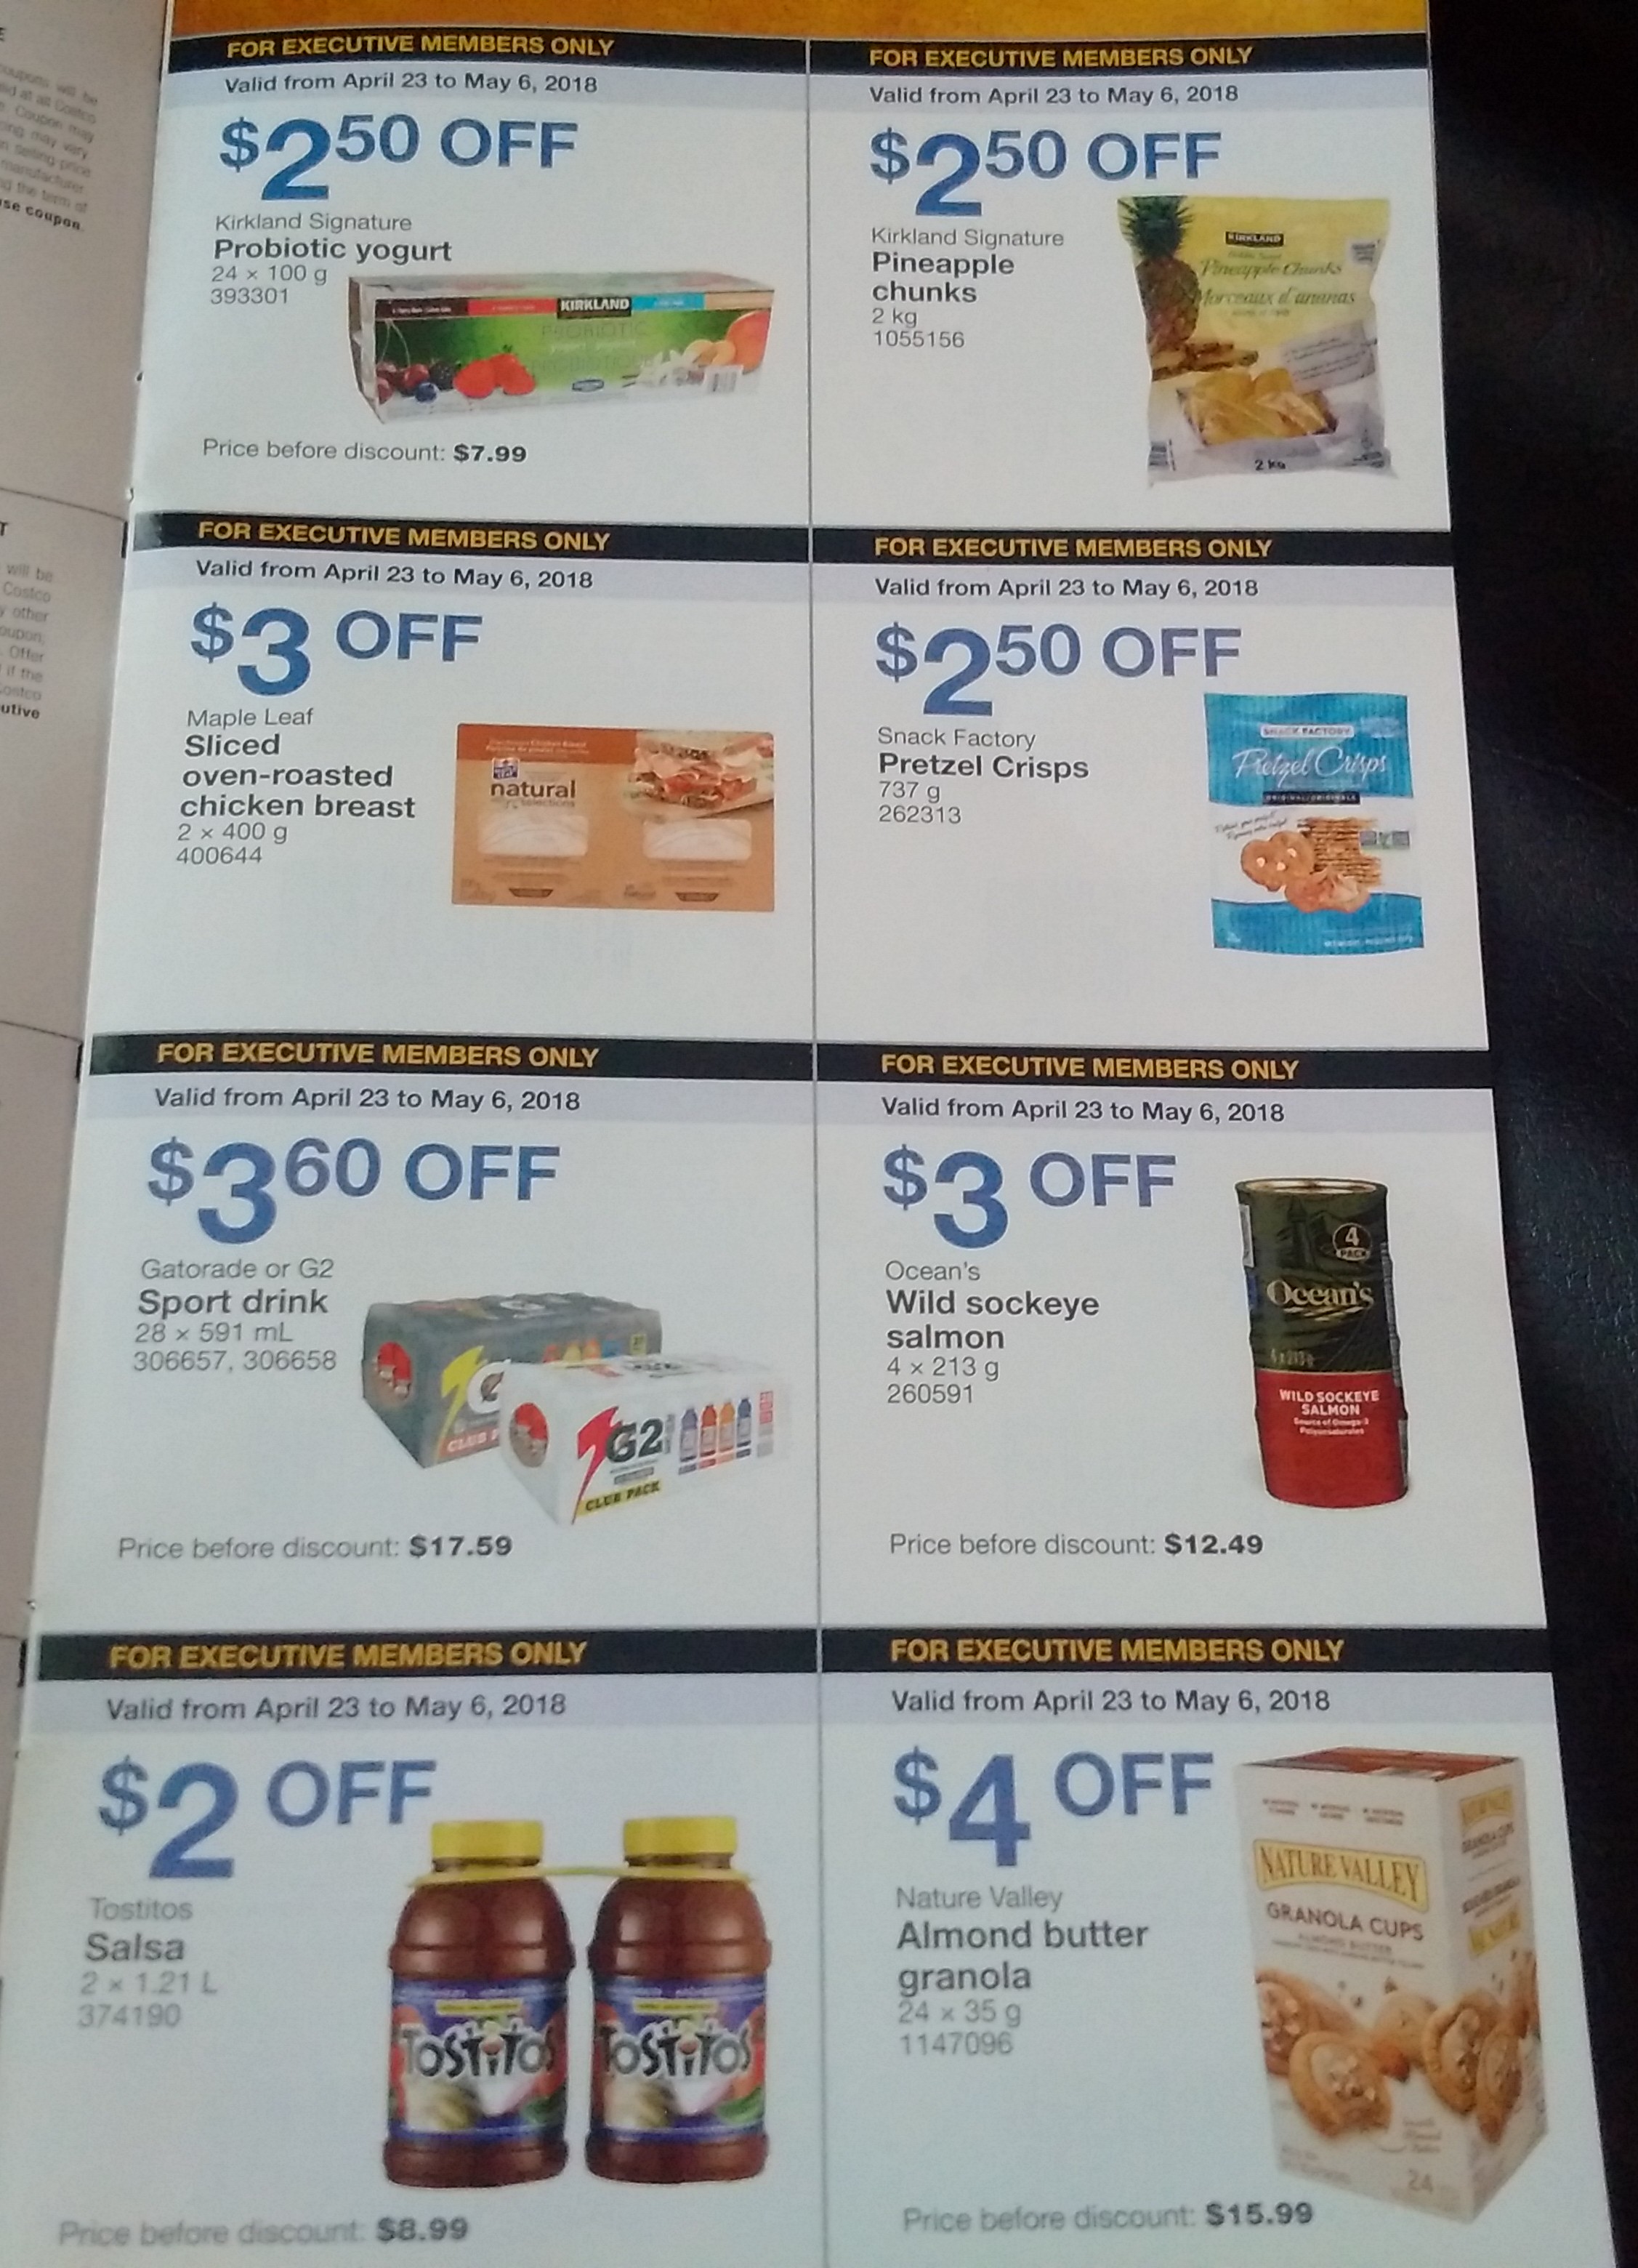 Costco Executive Coupons for Spring Save Money in Winnipeg